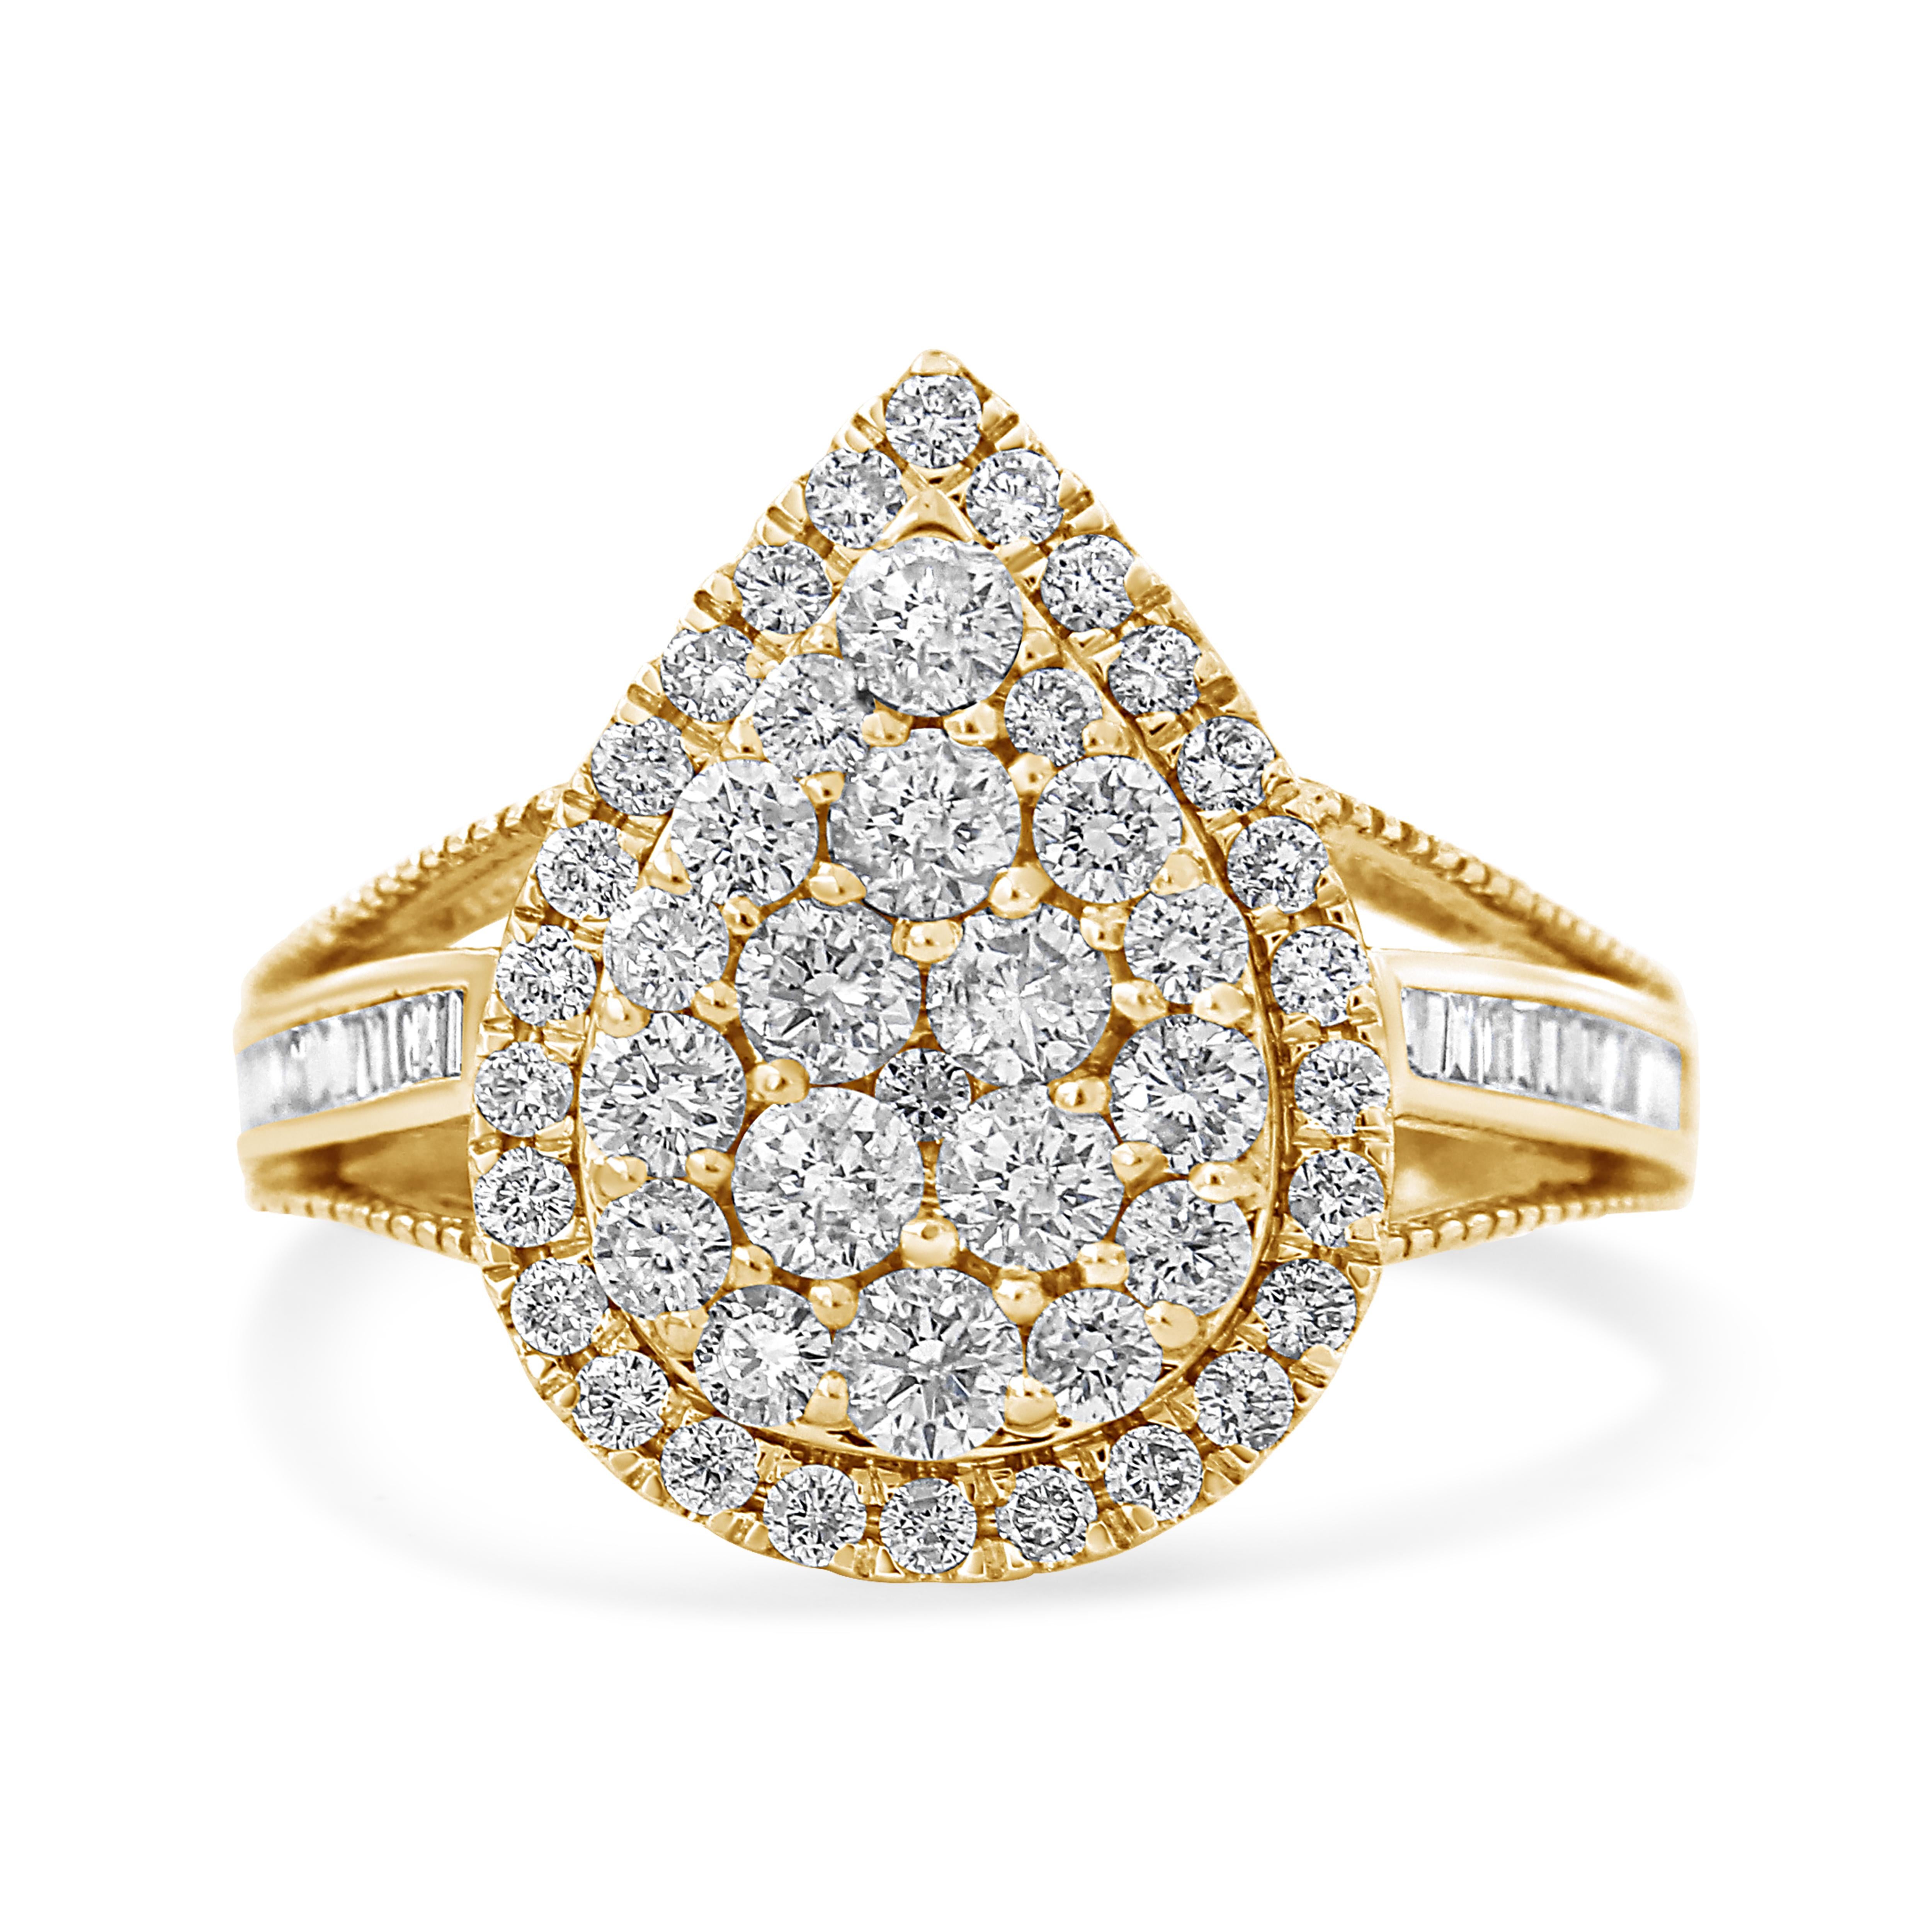 Dazzle and delight her with this stunning diamond cocktail ring. Crafted in cool in 10k yellow gold plated .925 sterling, this fancy-shape fashion ring showcases a sparkling a stunning total weight of 1 1/2 carat of diamonds wrapped in a pear-shaped